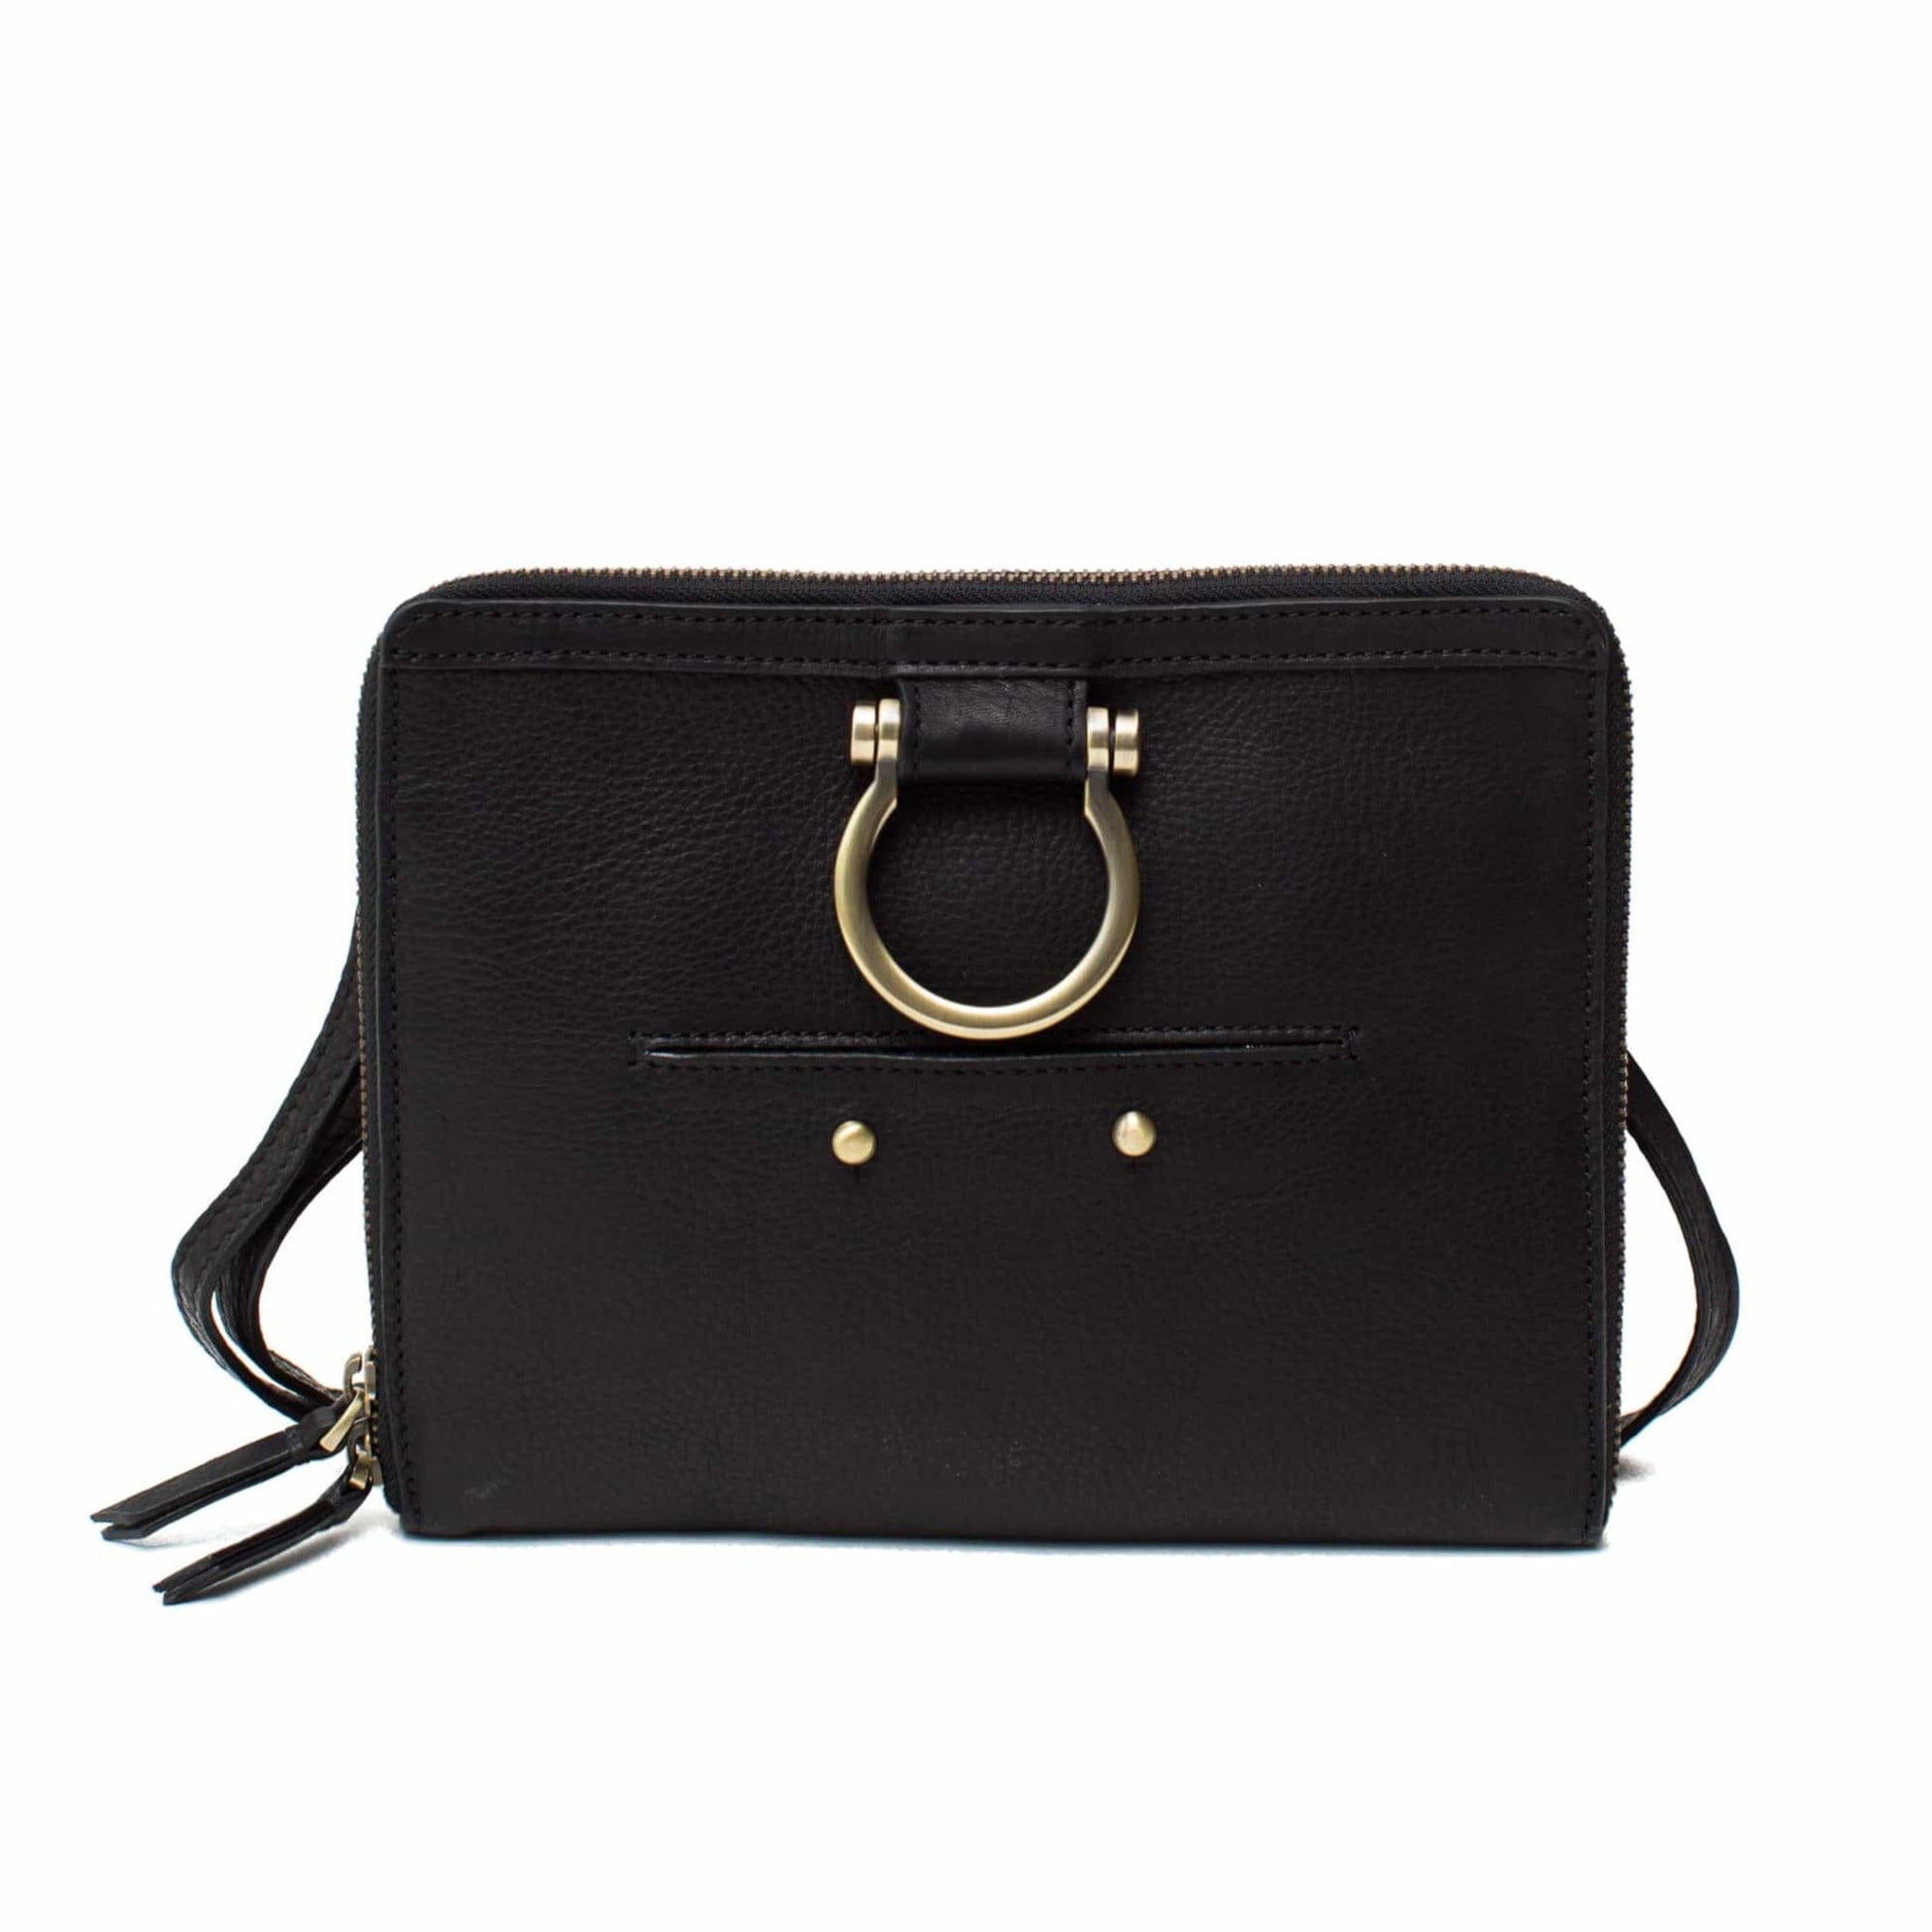 The M mini crossbody bag in black raw leather has a zip enclosure, front exterior stud pocket, and Omega hardware.